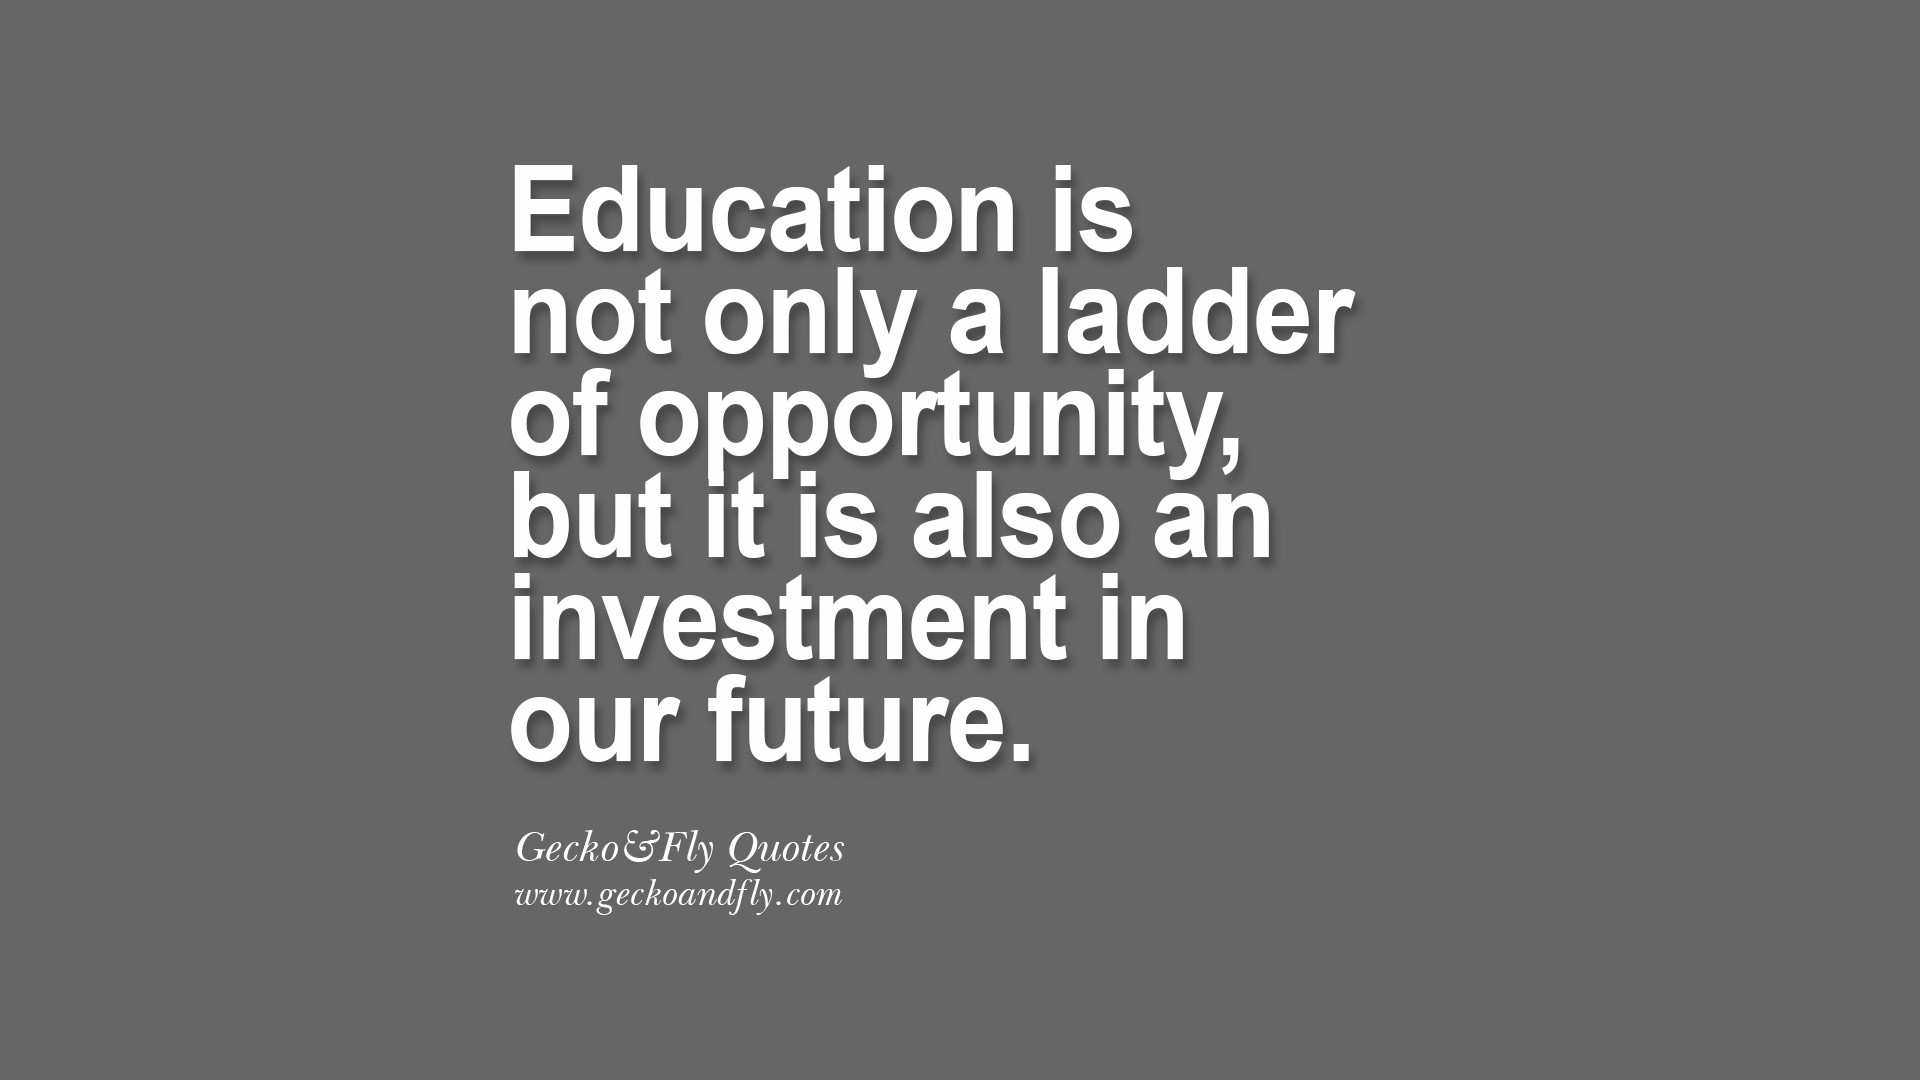 Quote About The Importance Of Education
 Importance Early Education Quotes QuotesGram